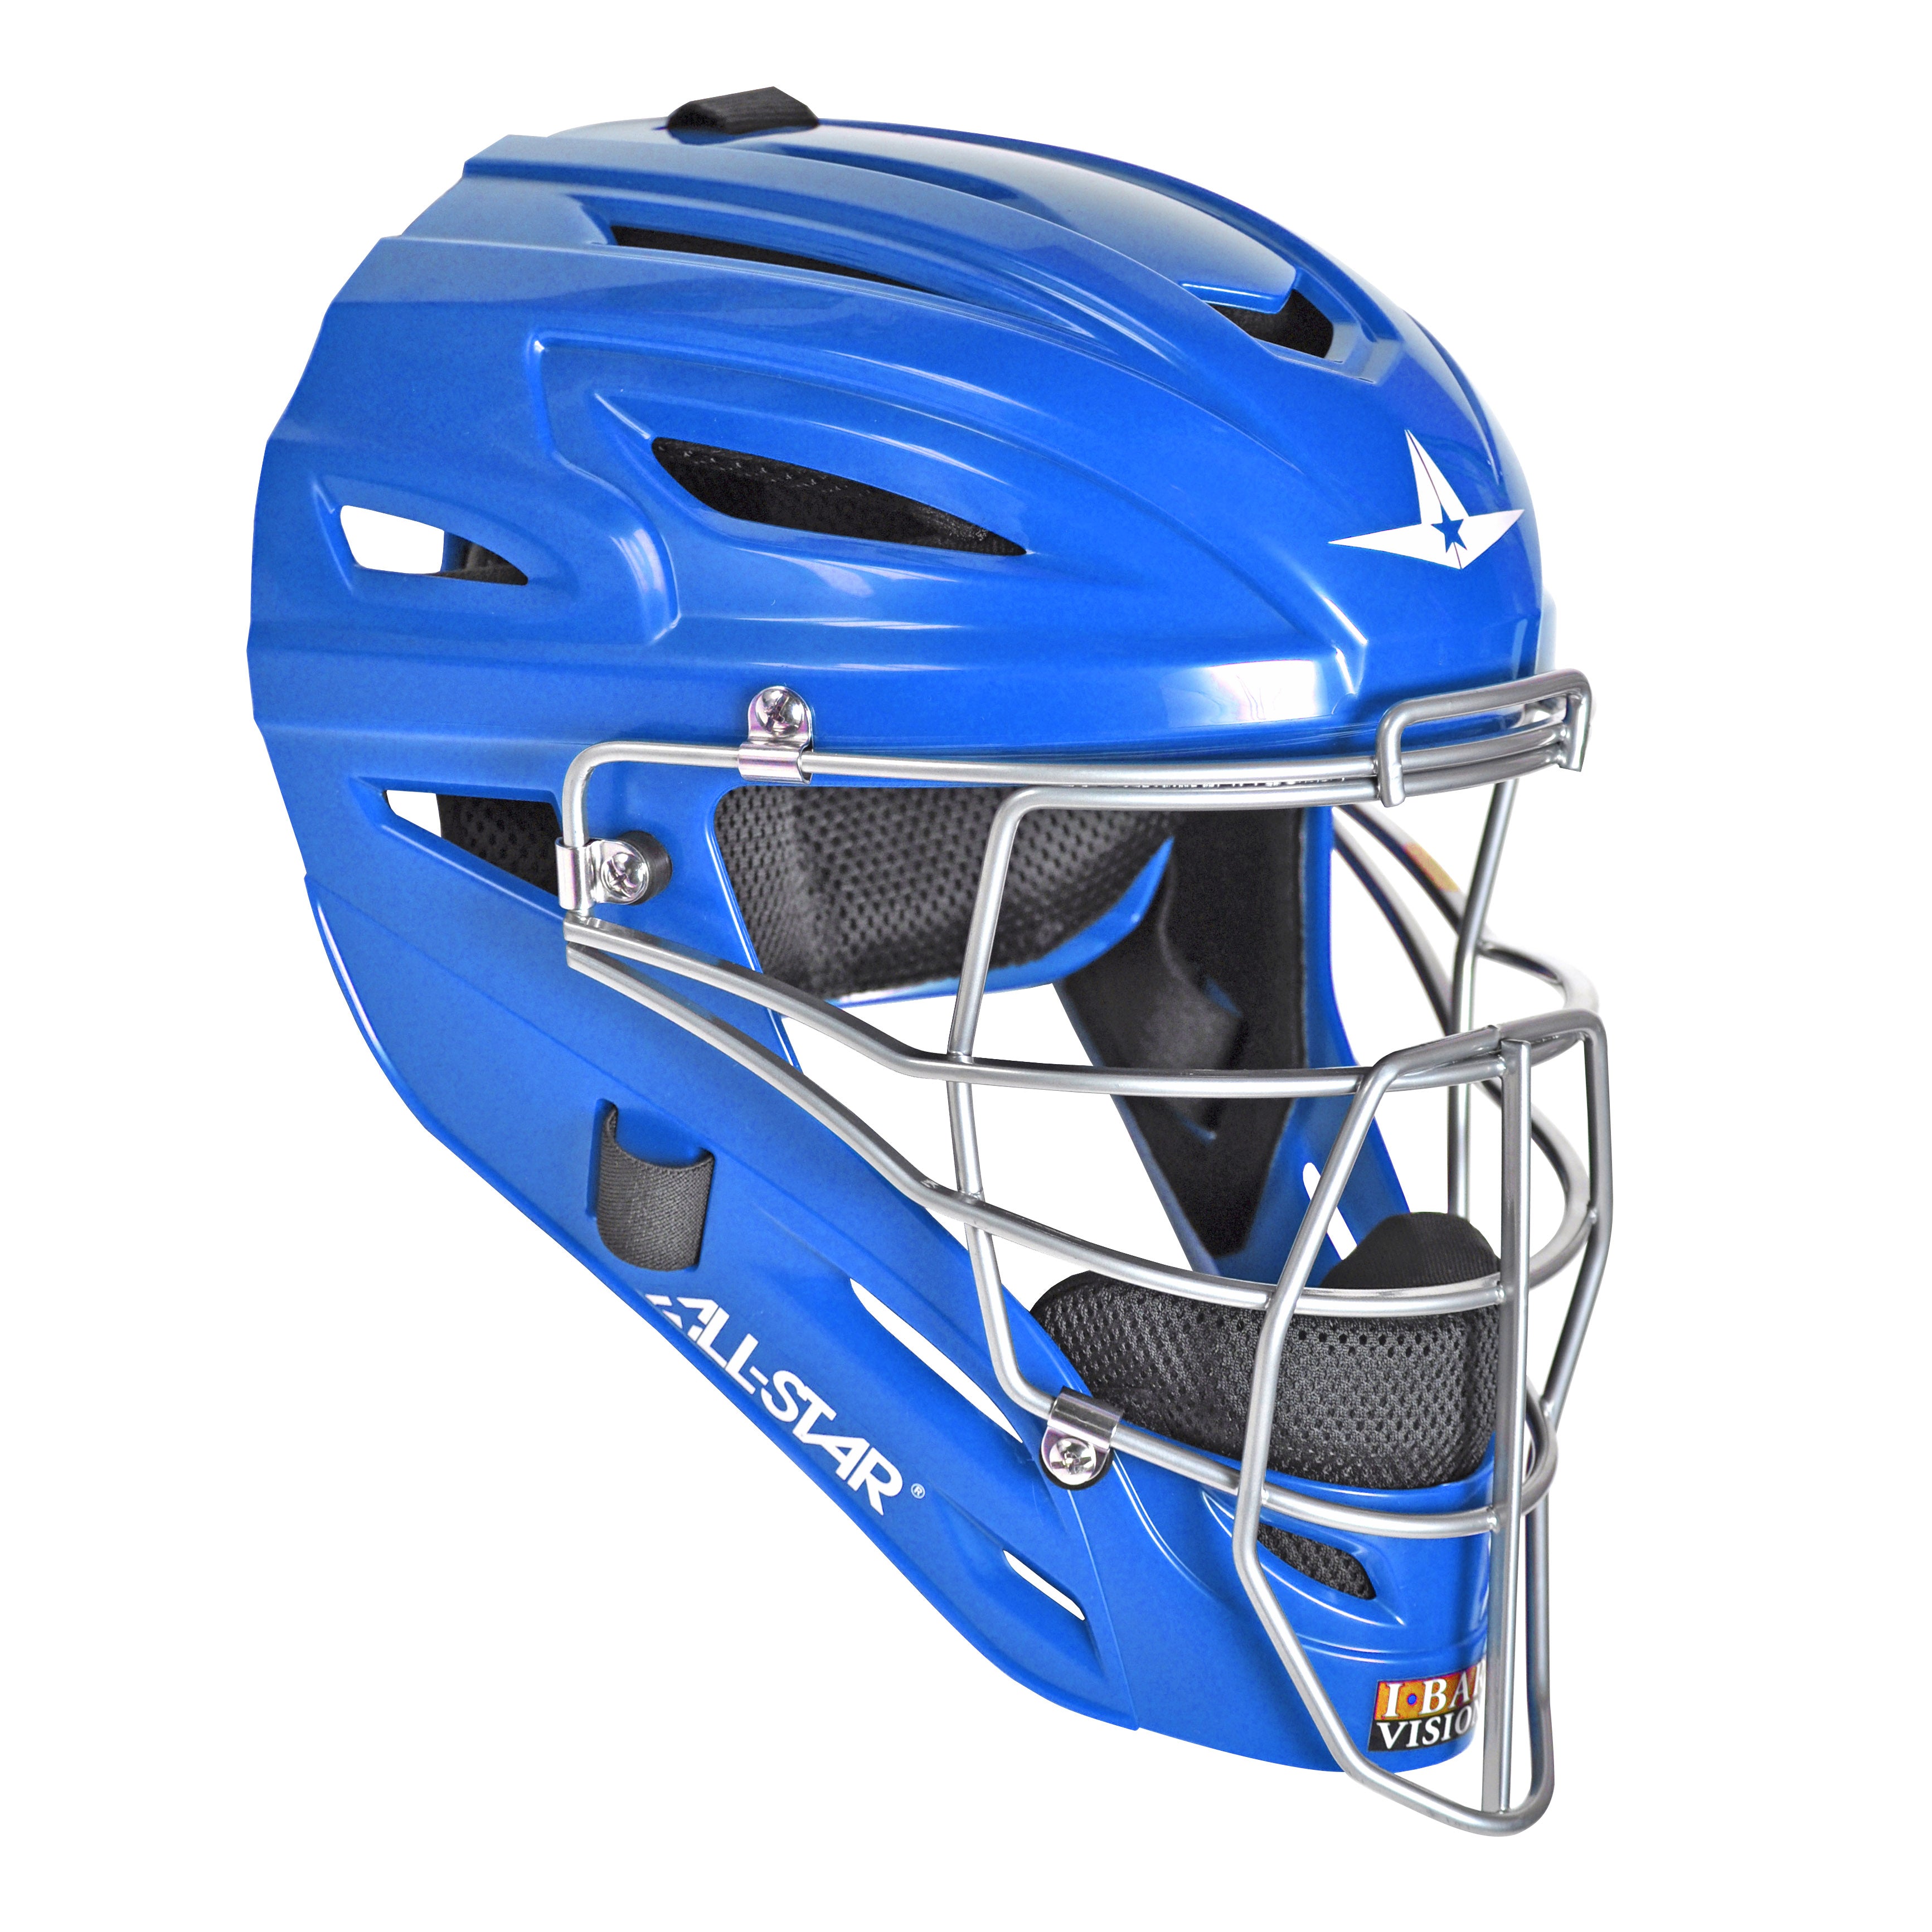 All-Star S7 AXIS Helmet / Ages 9-12